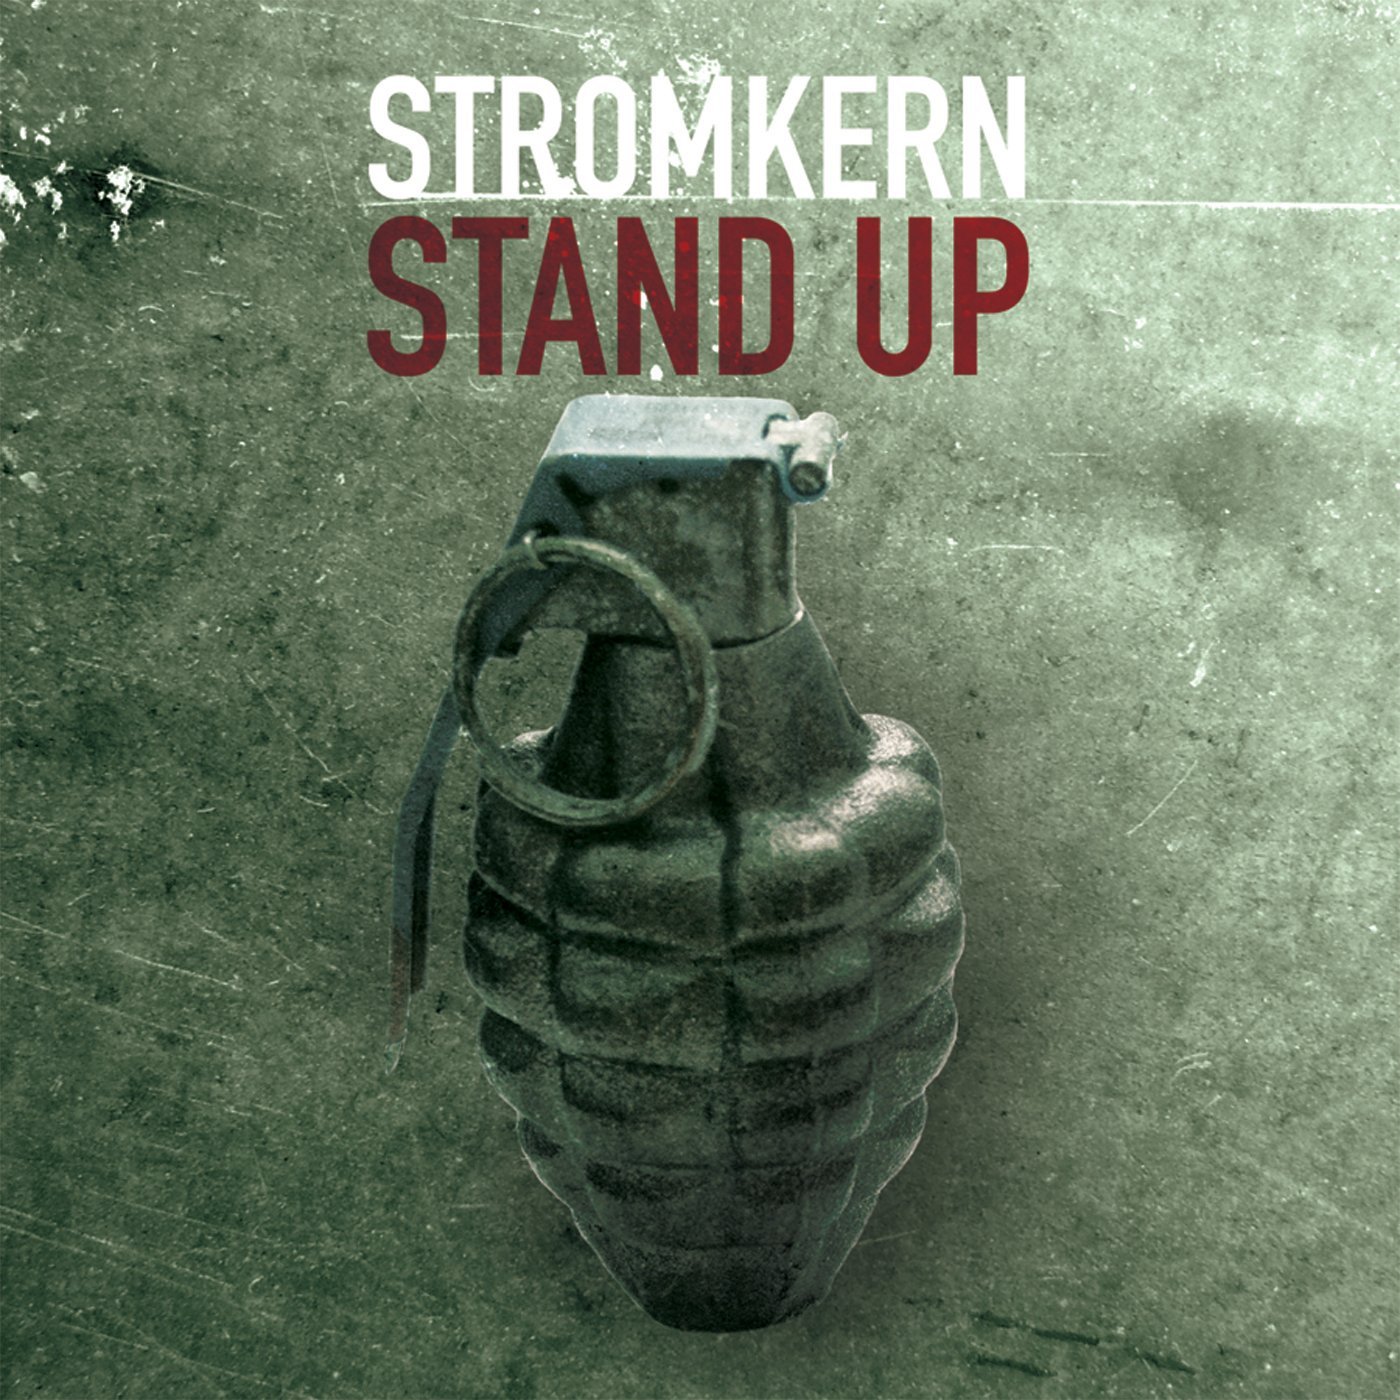 Stromkern - Stand Up (Army Of Darkness Mix by Battery Cage)